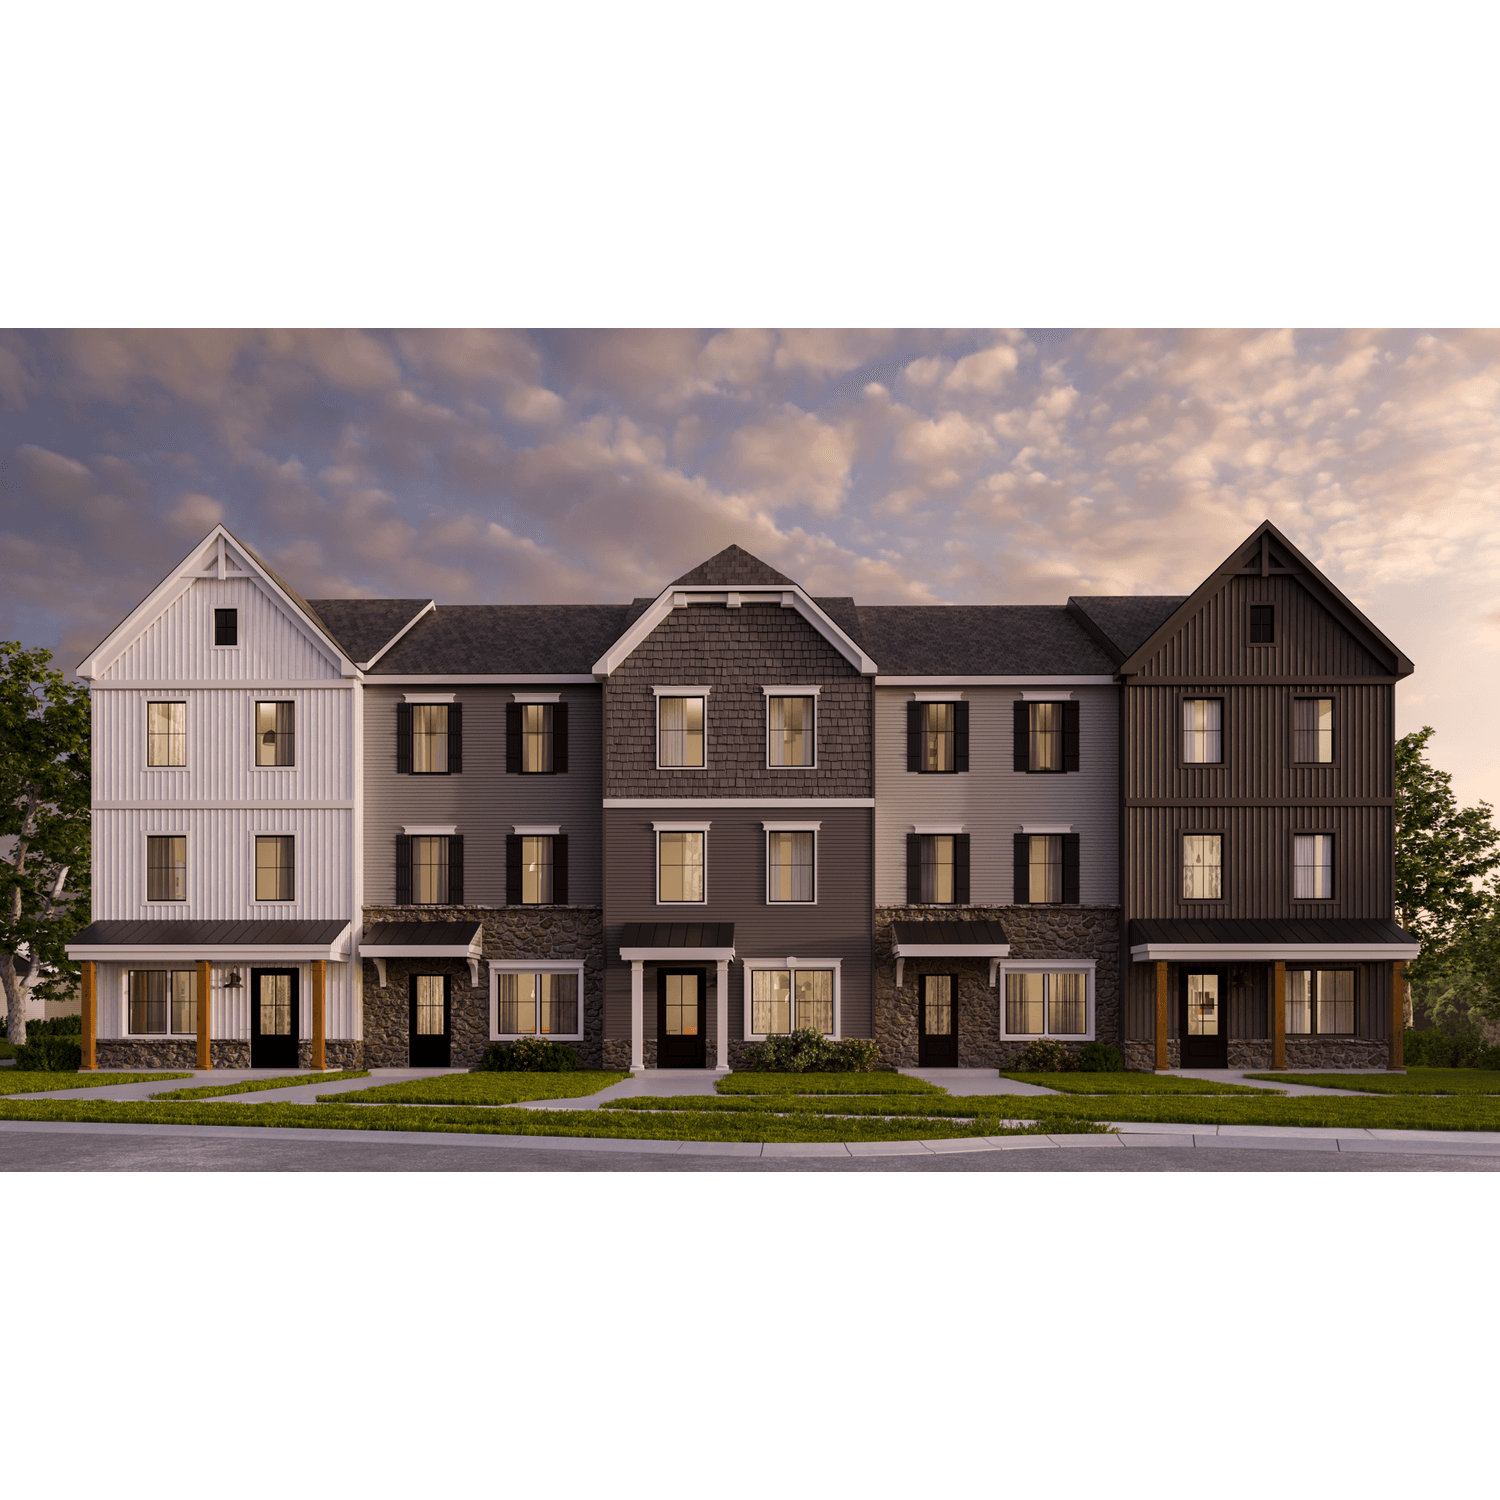 32. Kellerton Townhomes building at 1135 Futurity Street, Frederick, MD 21702